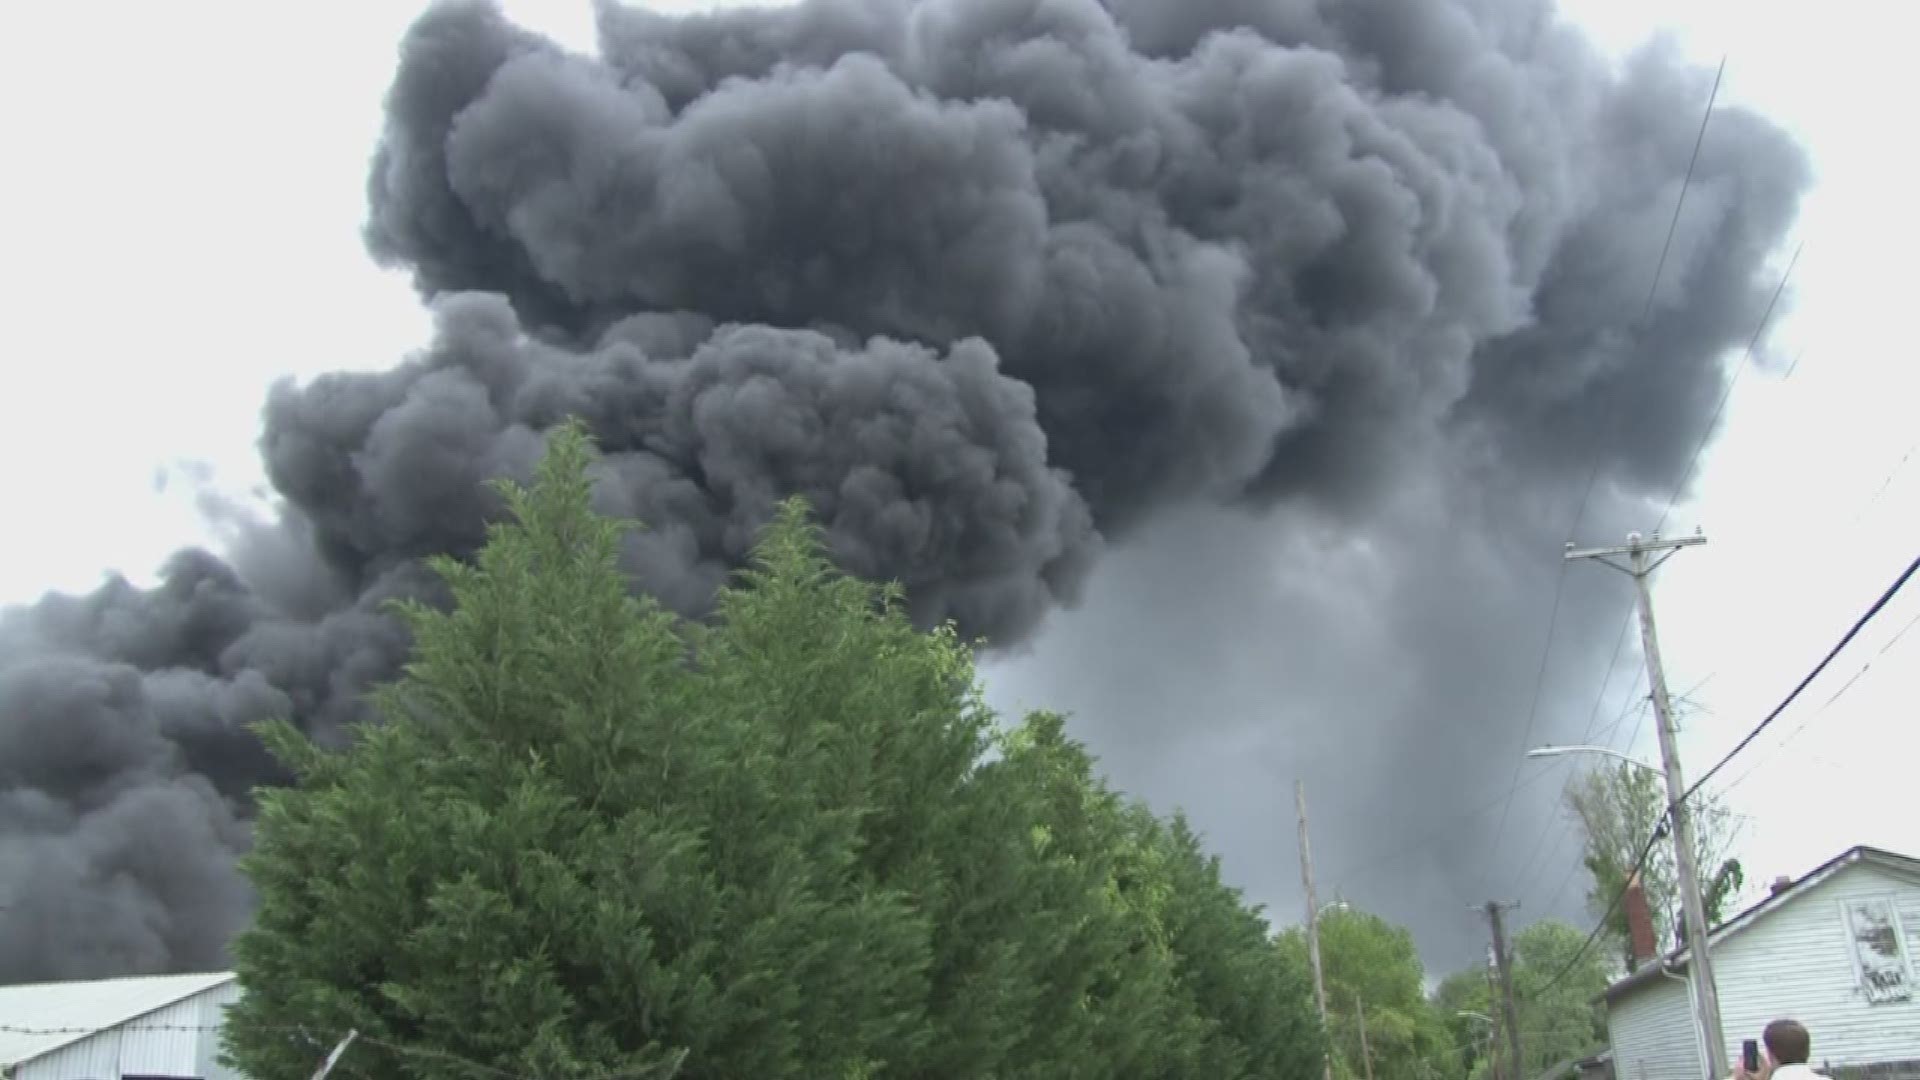 Knoxville Fire Department Captain DJ Corcoran joins us to talk about the department's efforts to put out a massive fire that broke out at Fort Loudon Waste and Recycling in North Knoxville. Here's what's ahead as crews continue to work to put it out.